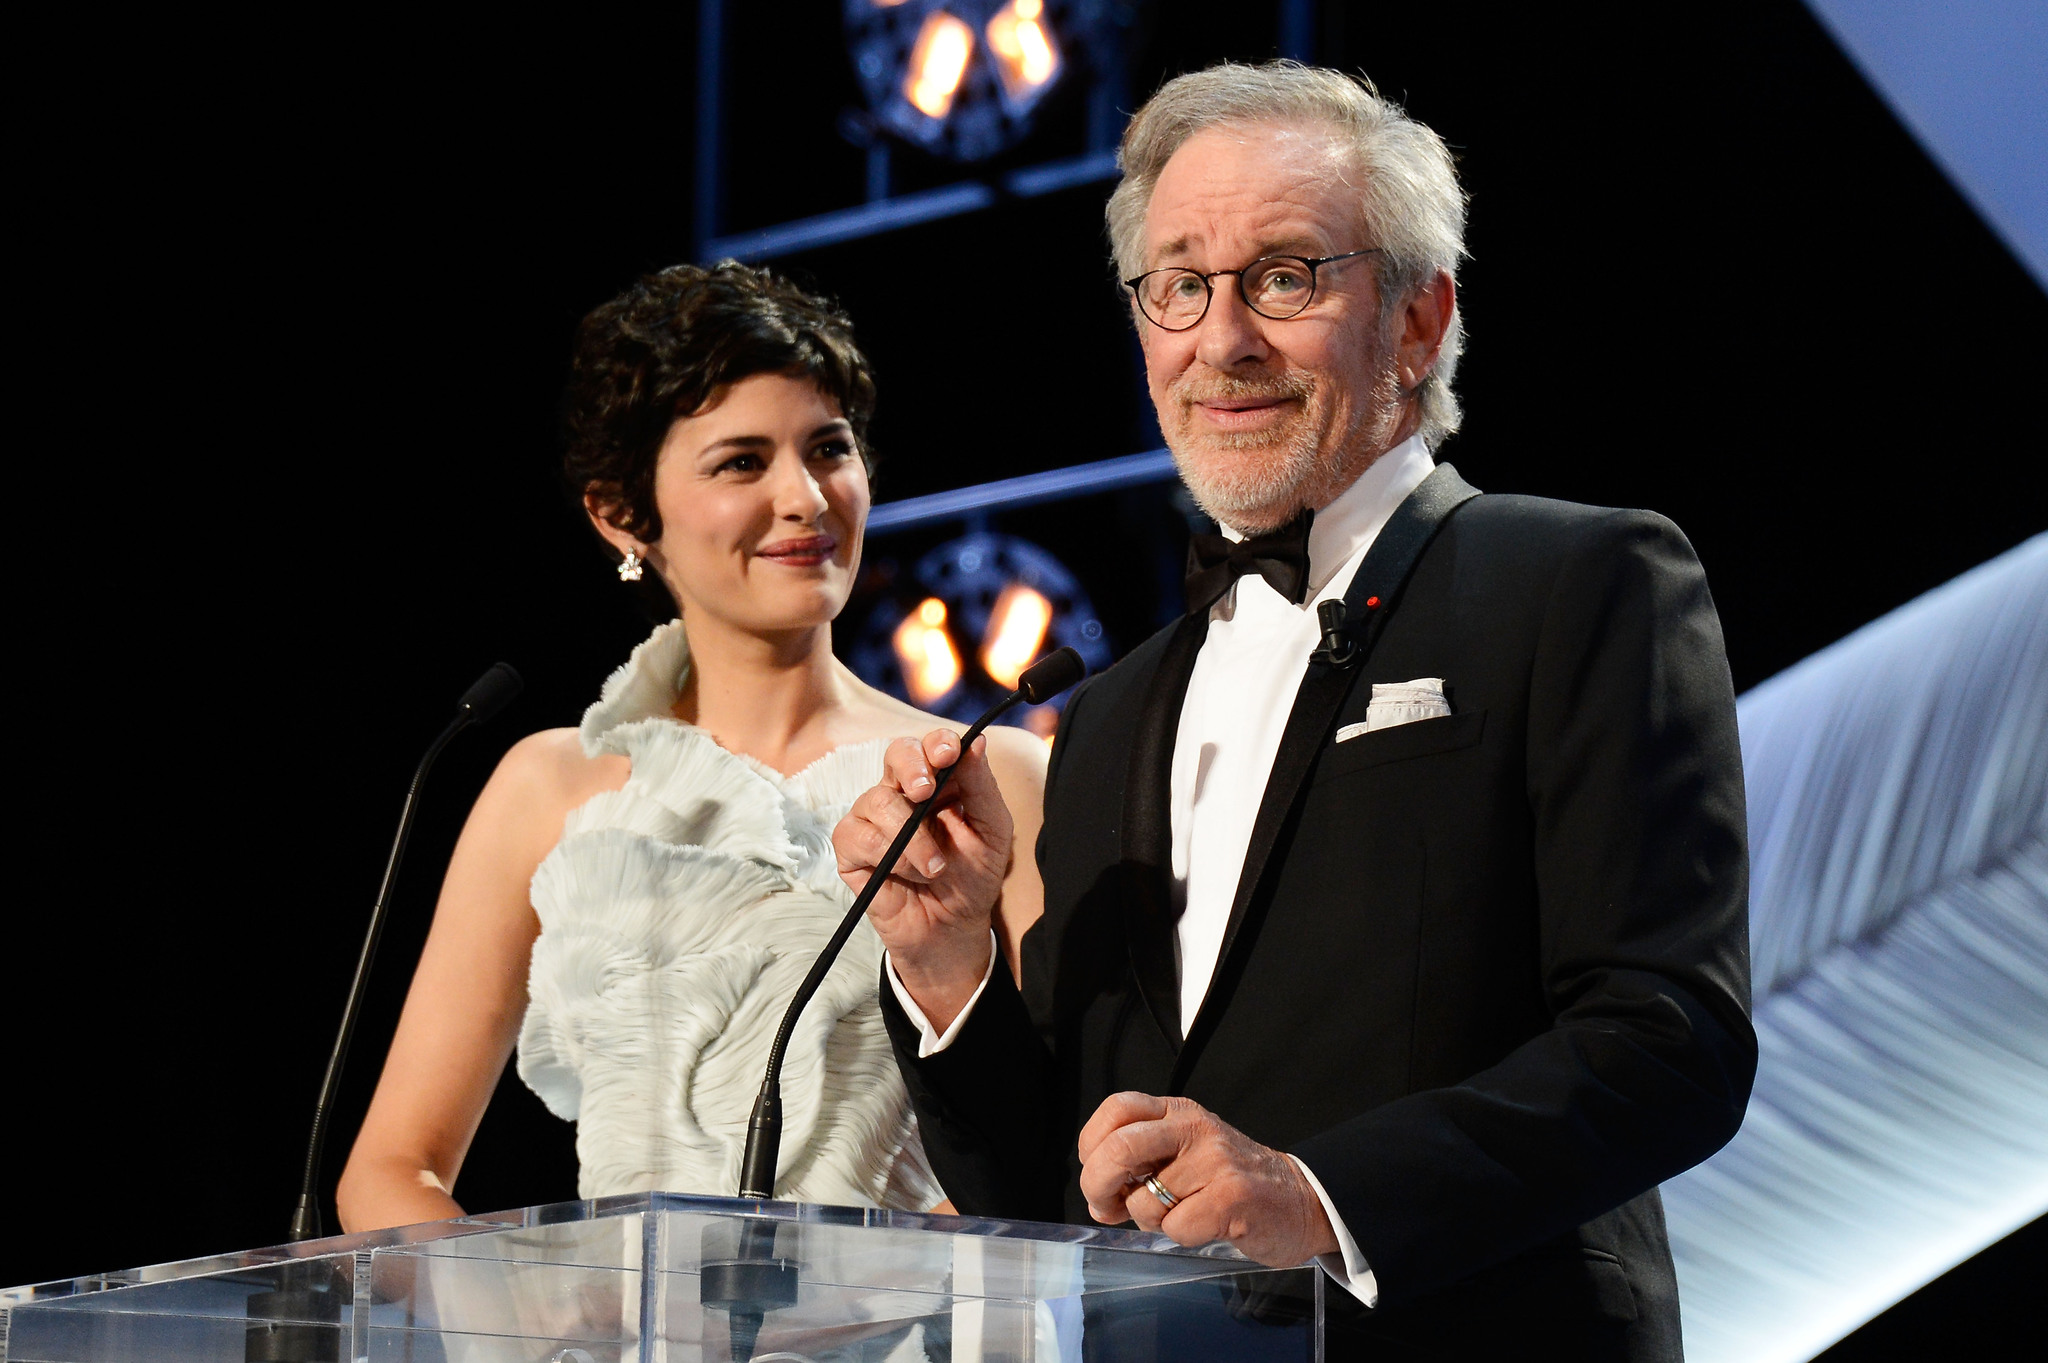 Steven Spielberg and Audrey Tautou